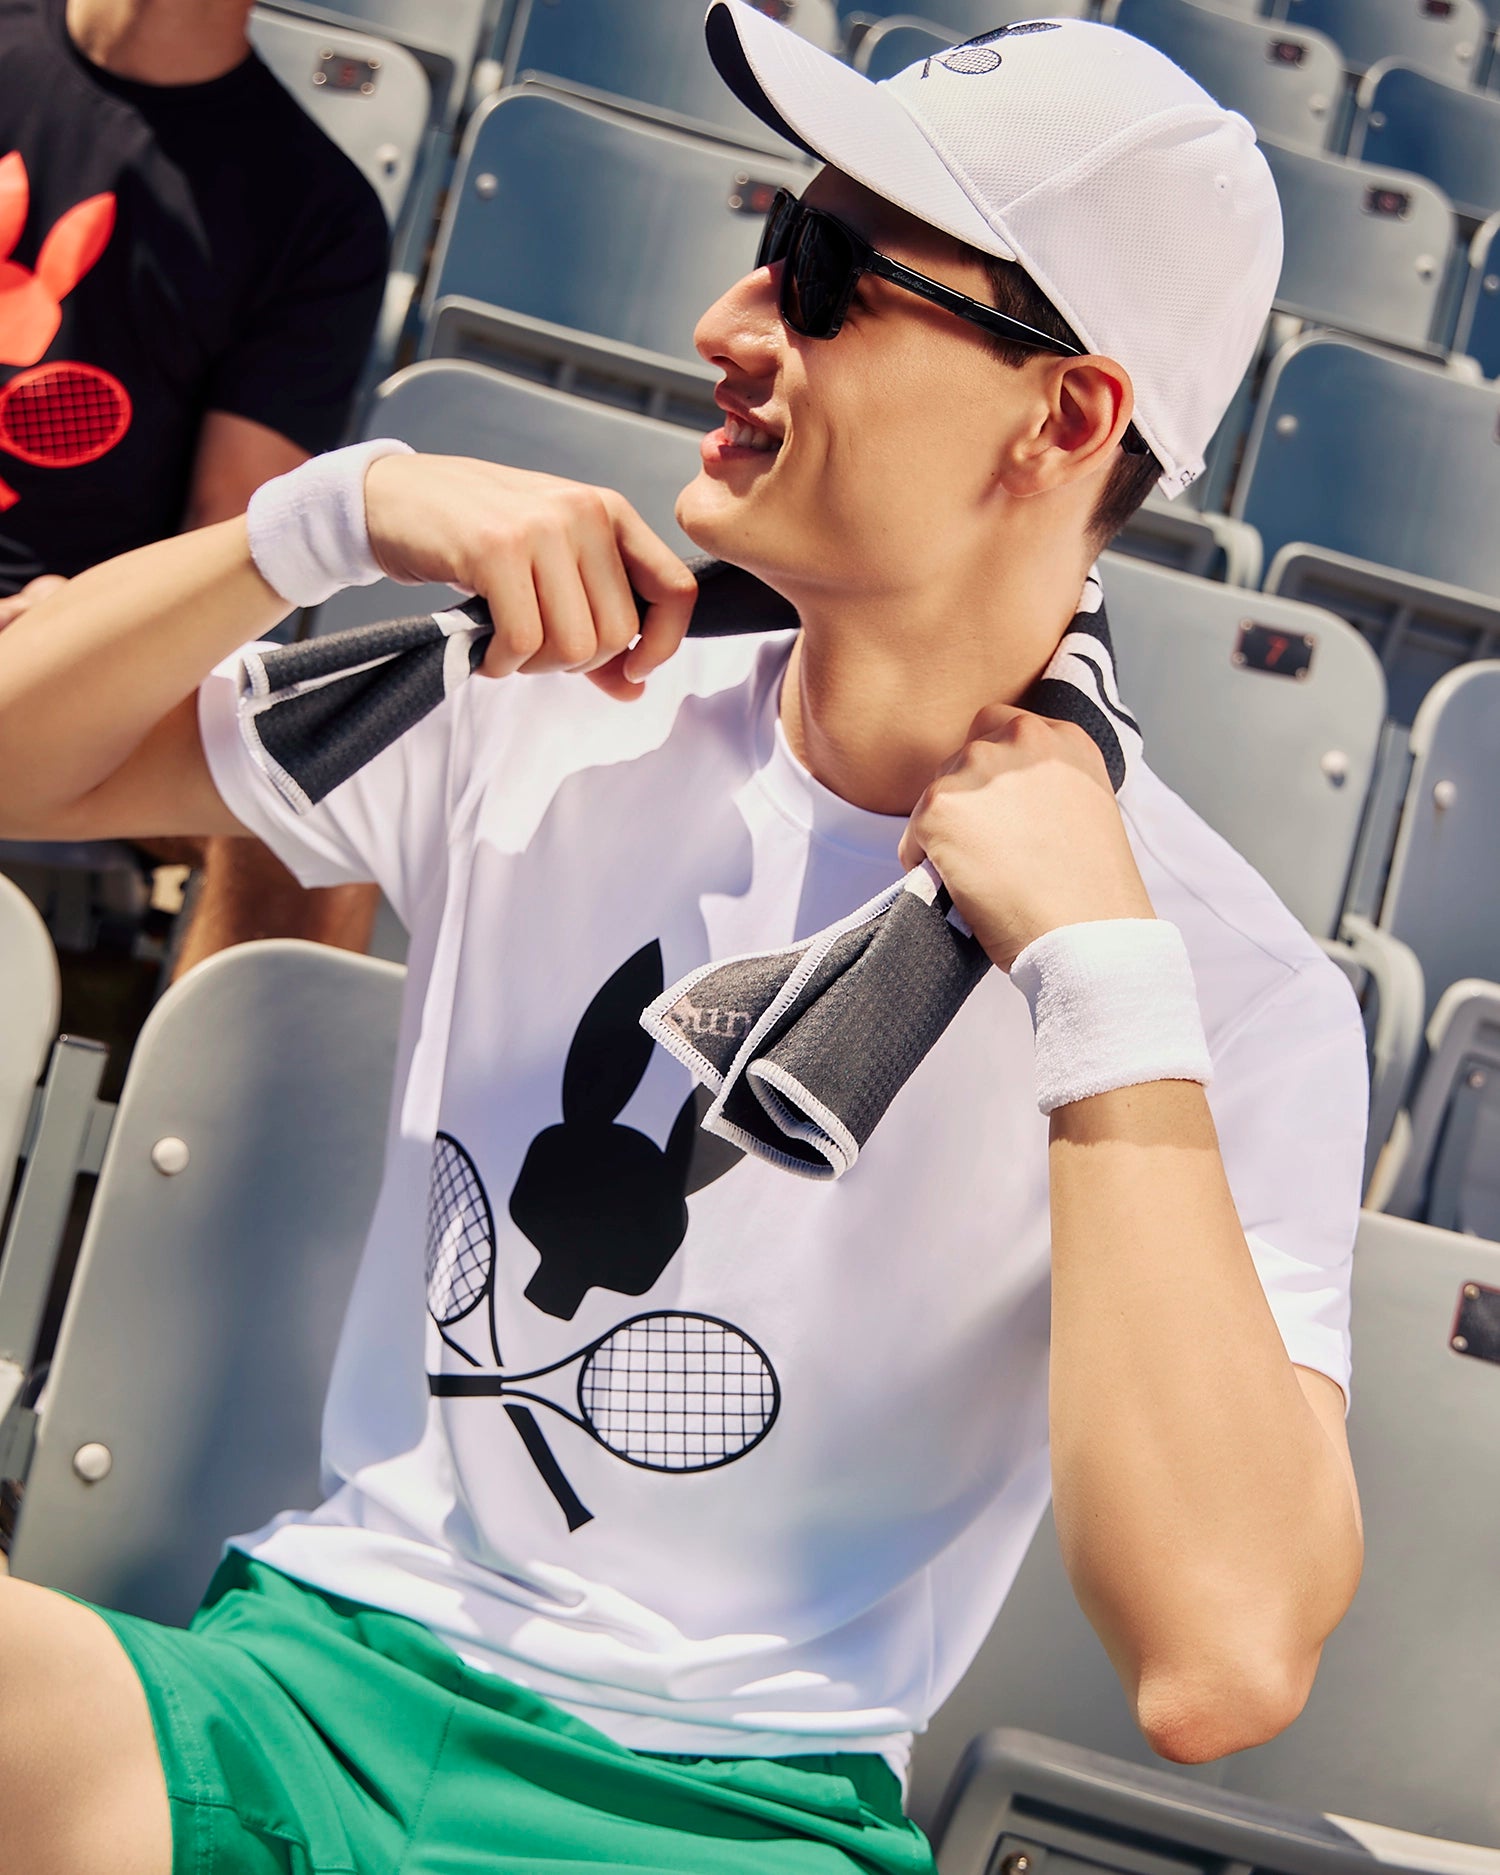 A person wearing a white shirt with a tennis-inspired Psycho Bunny logo, white cap, sunglasses, and green shorts sits in stadium bleachers. The individual is holding a towel around their neck and wearing wristbands, appearing relaxed and happy. Another person is seated nearby in the background.